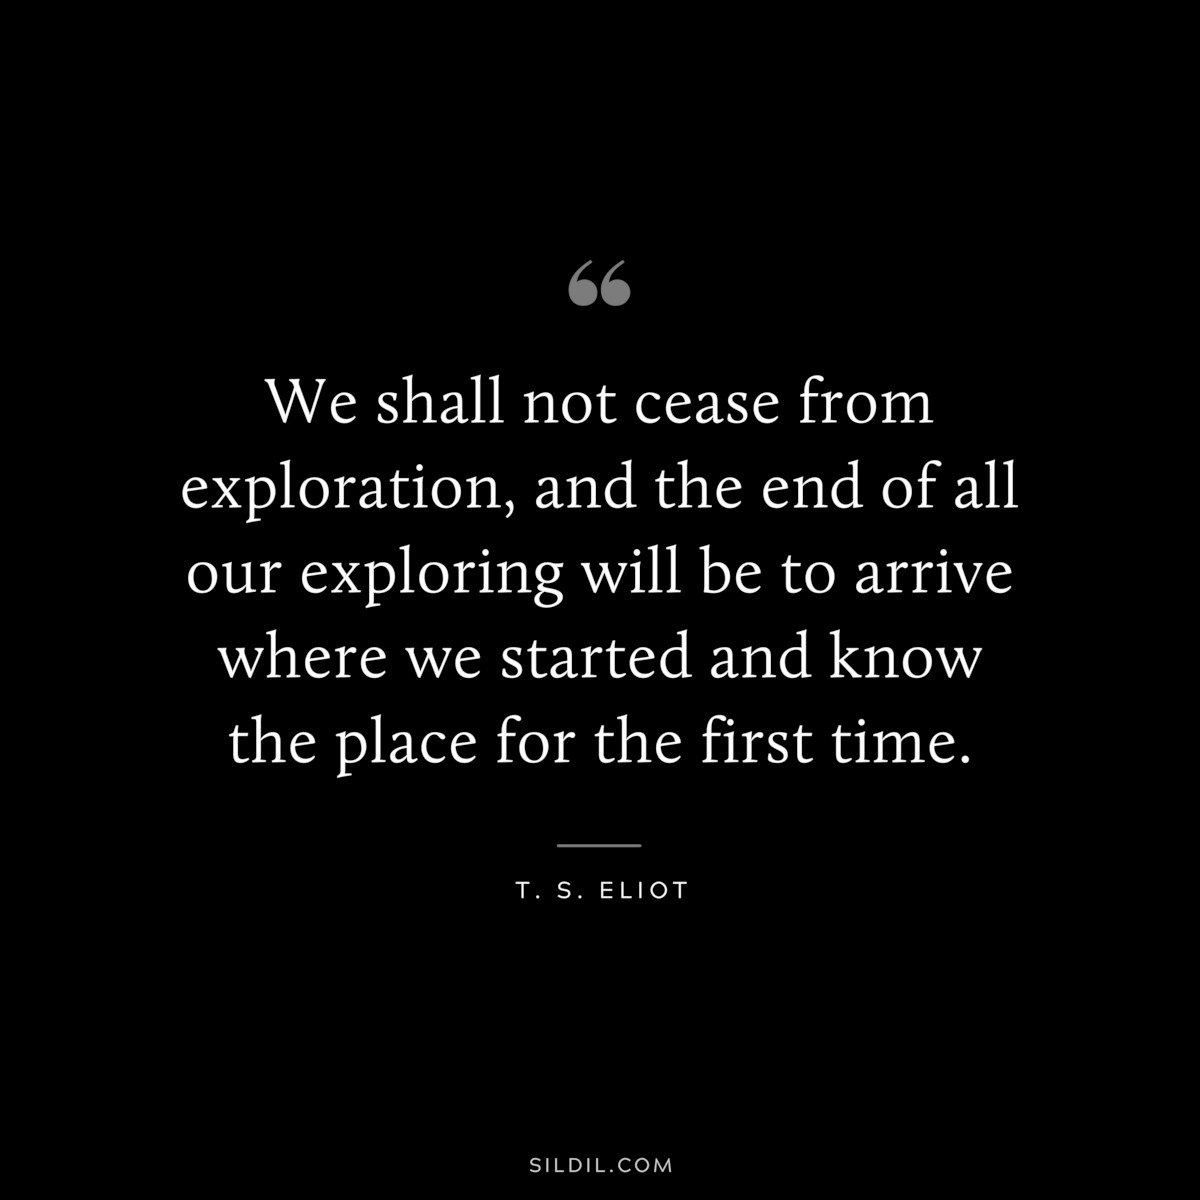 We shall not cease from exploration, and the end of all our exploring will be to arrive where we started and know the place for the first time. ― T. S. Eliot